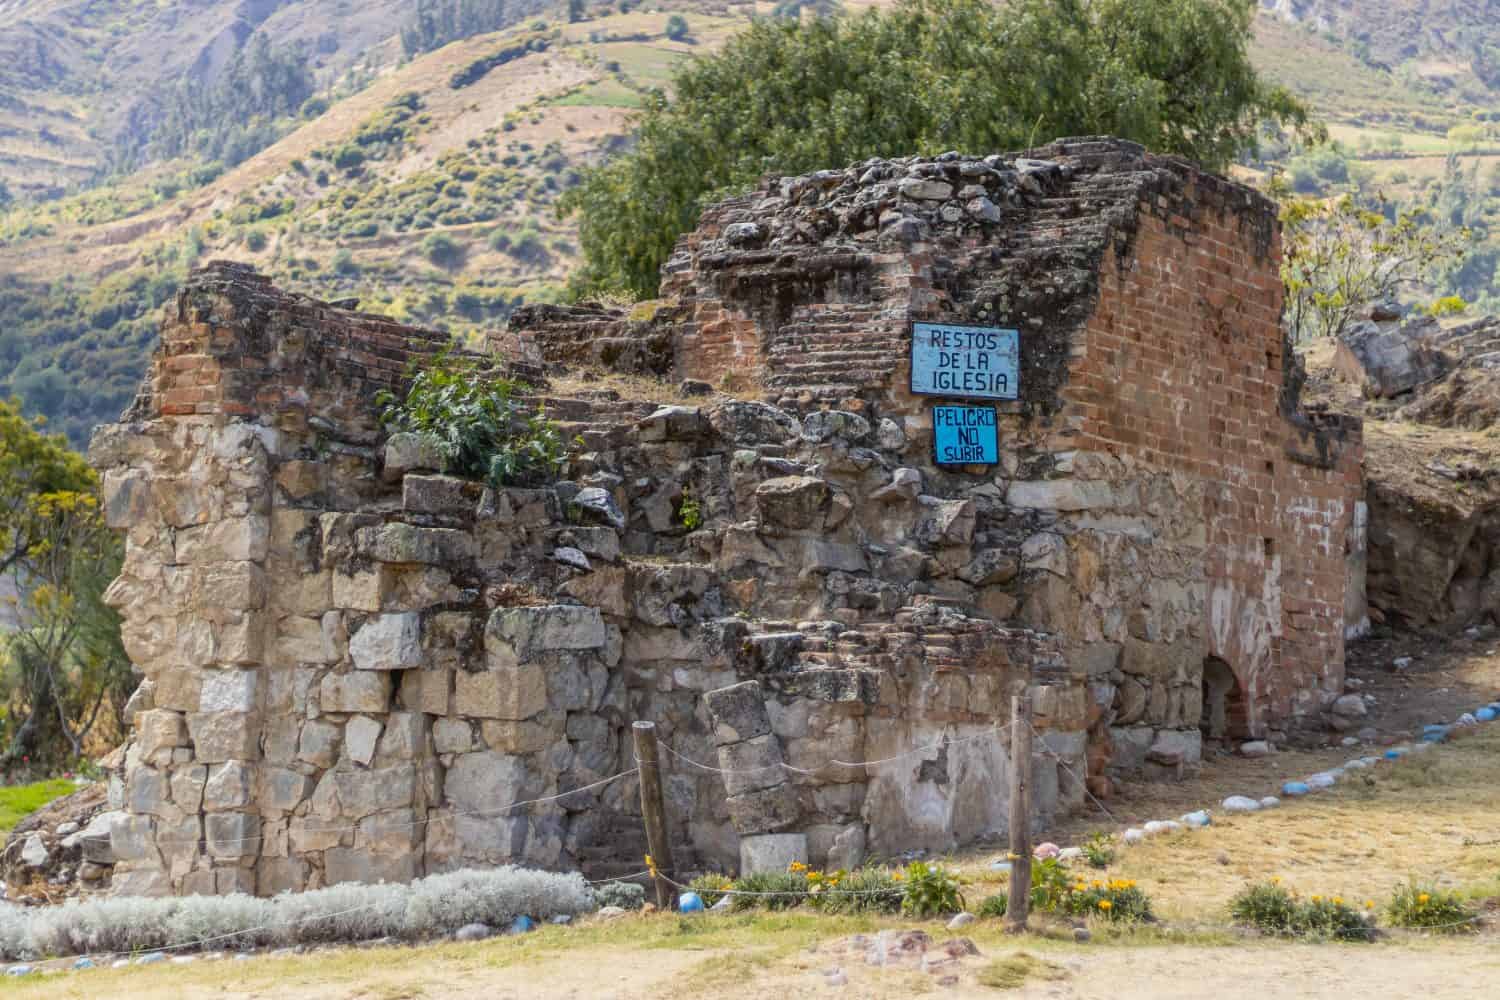 Remains of bricks and stones of the old church (danger, do not climb) of Yungay, Ancash - Peru